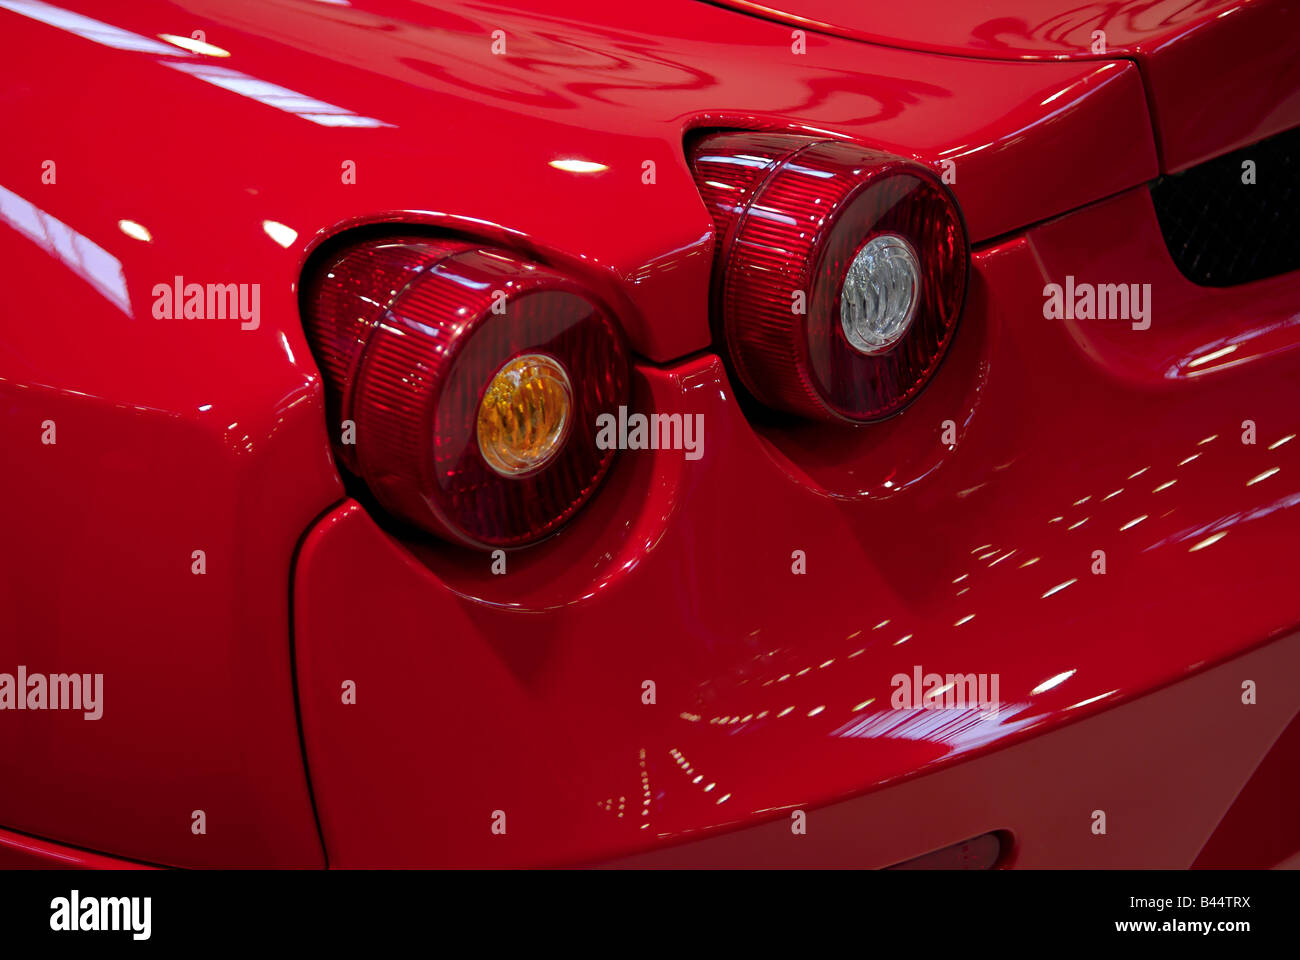 Backlights of a red luxury car Stock Photo